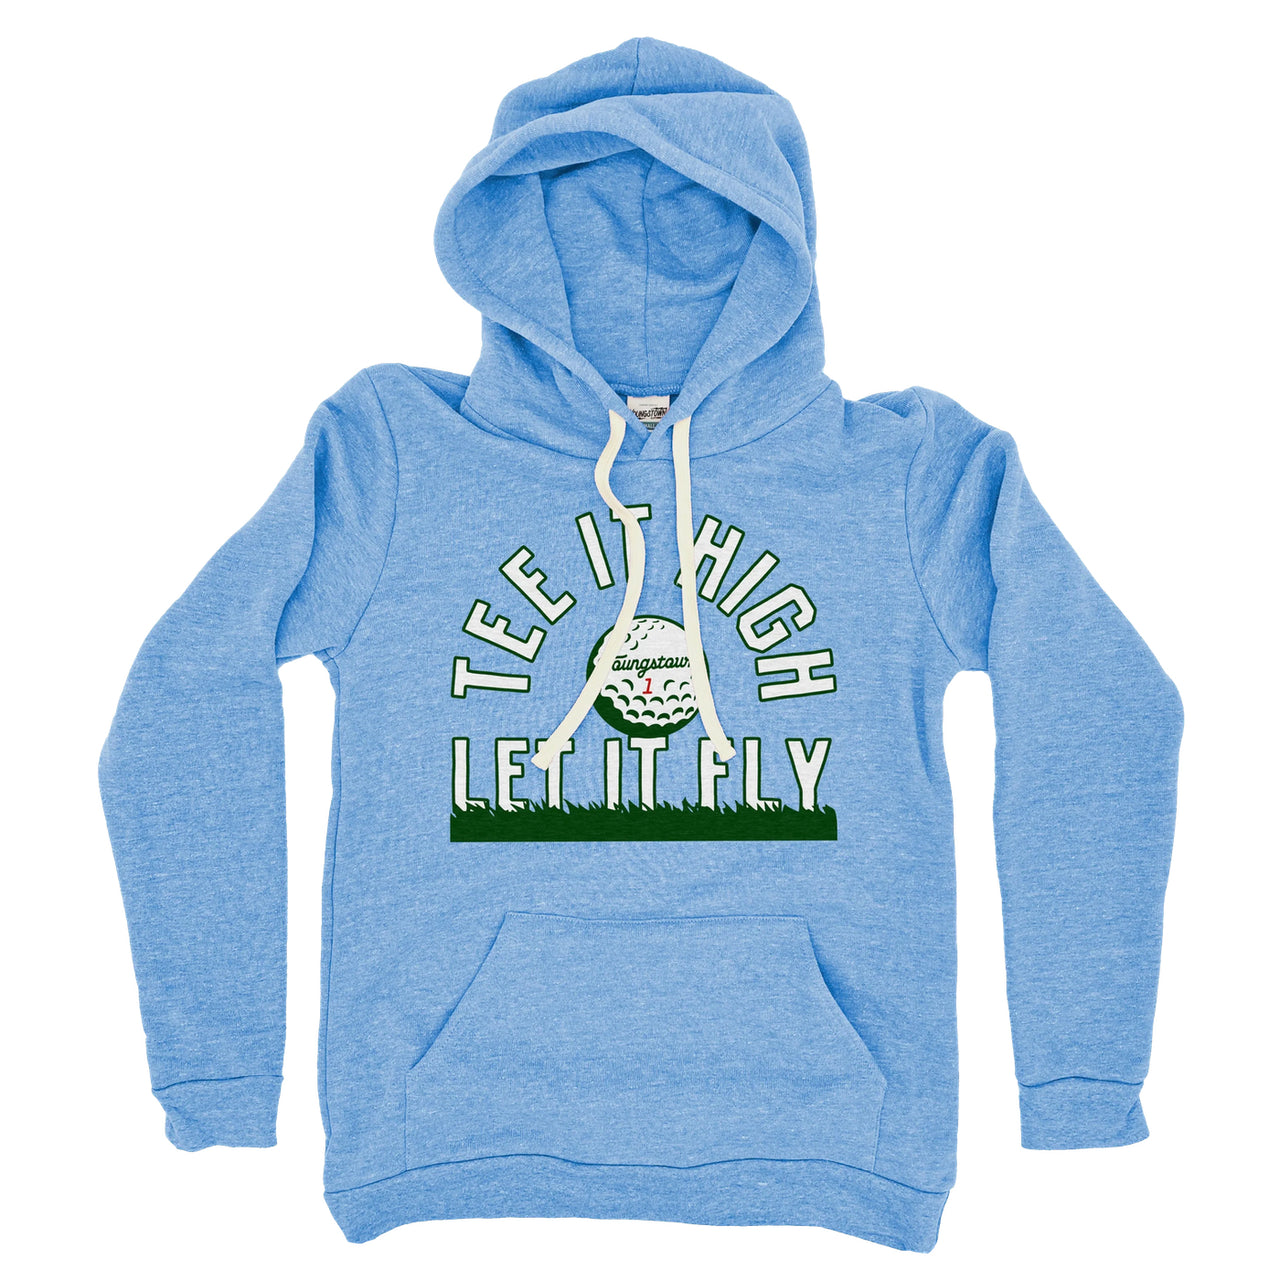 Tee It High and Let it Fly Hoodie